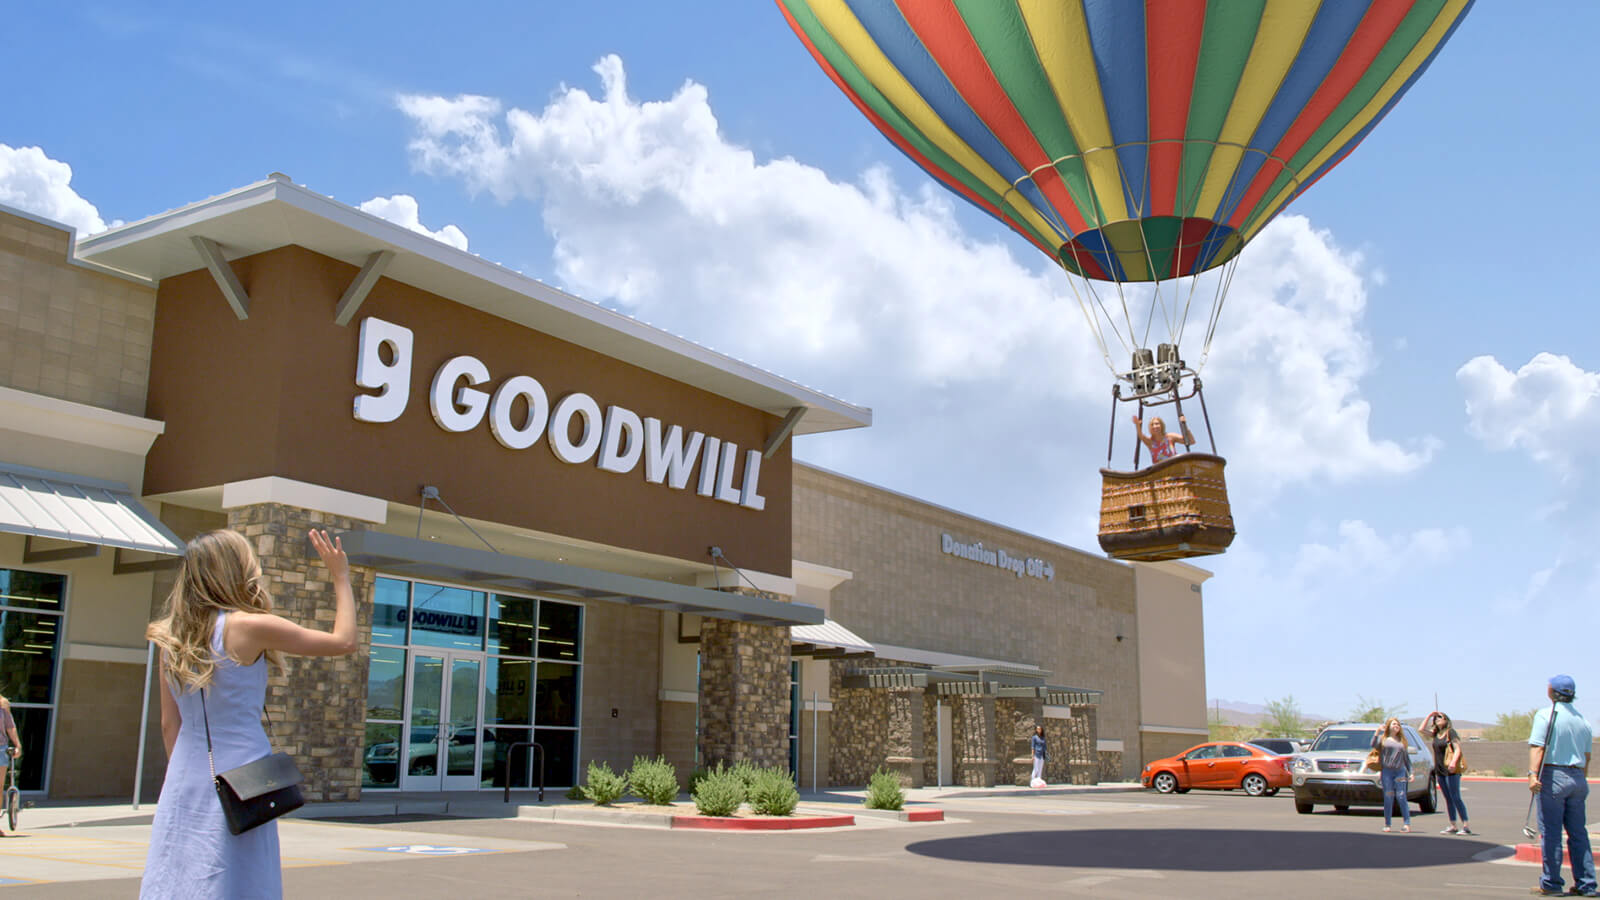 Image of Goodwill hot air balloon commercial